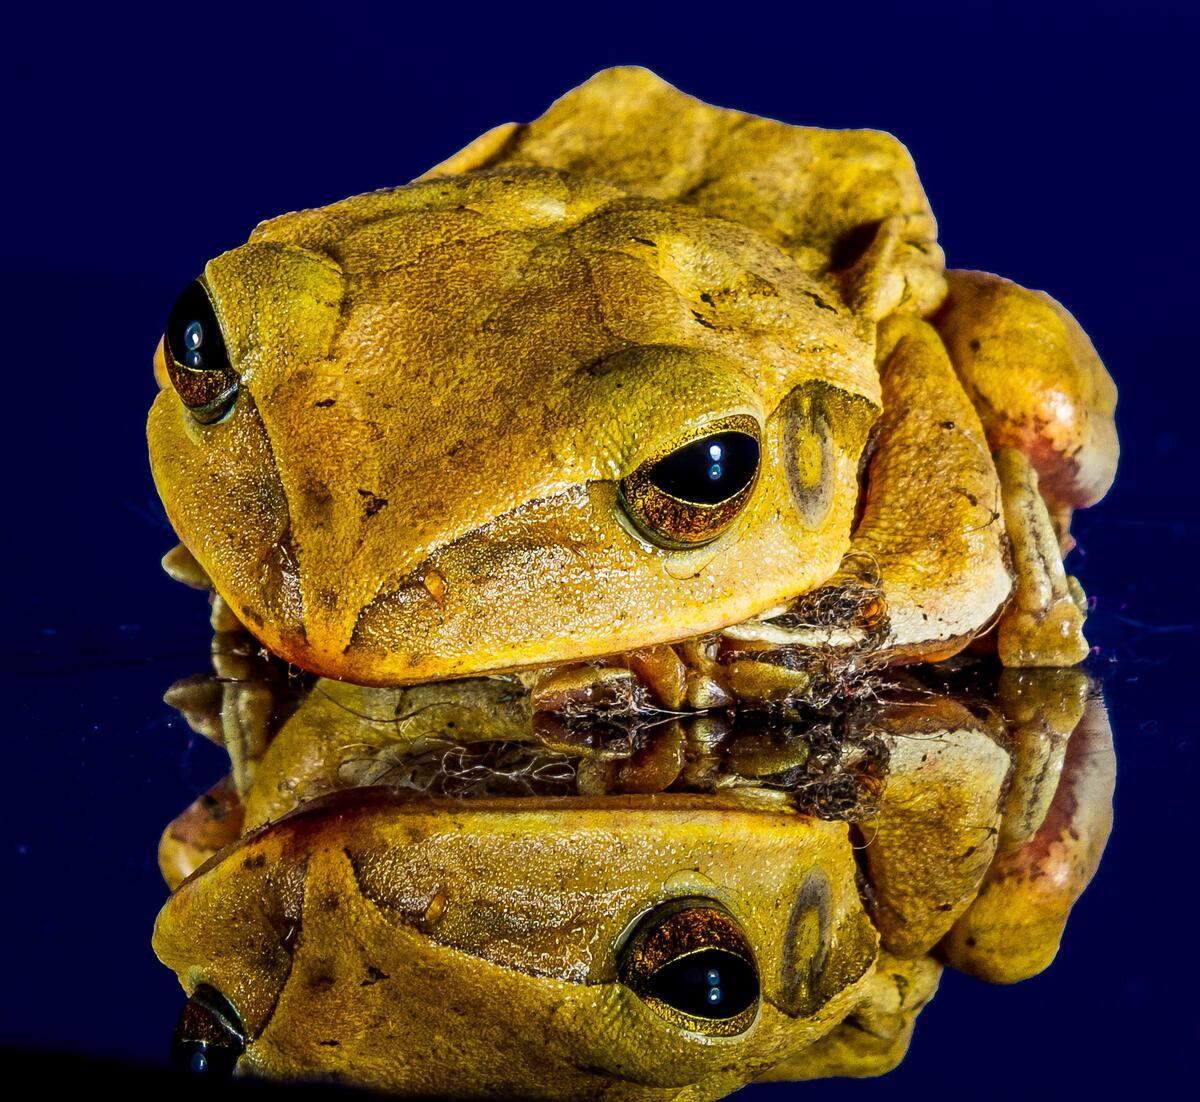 Green toad close-up